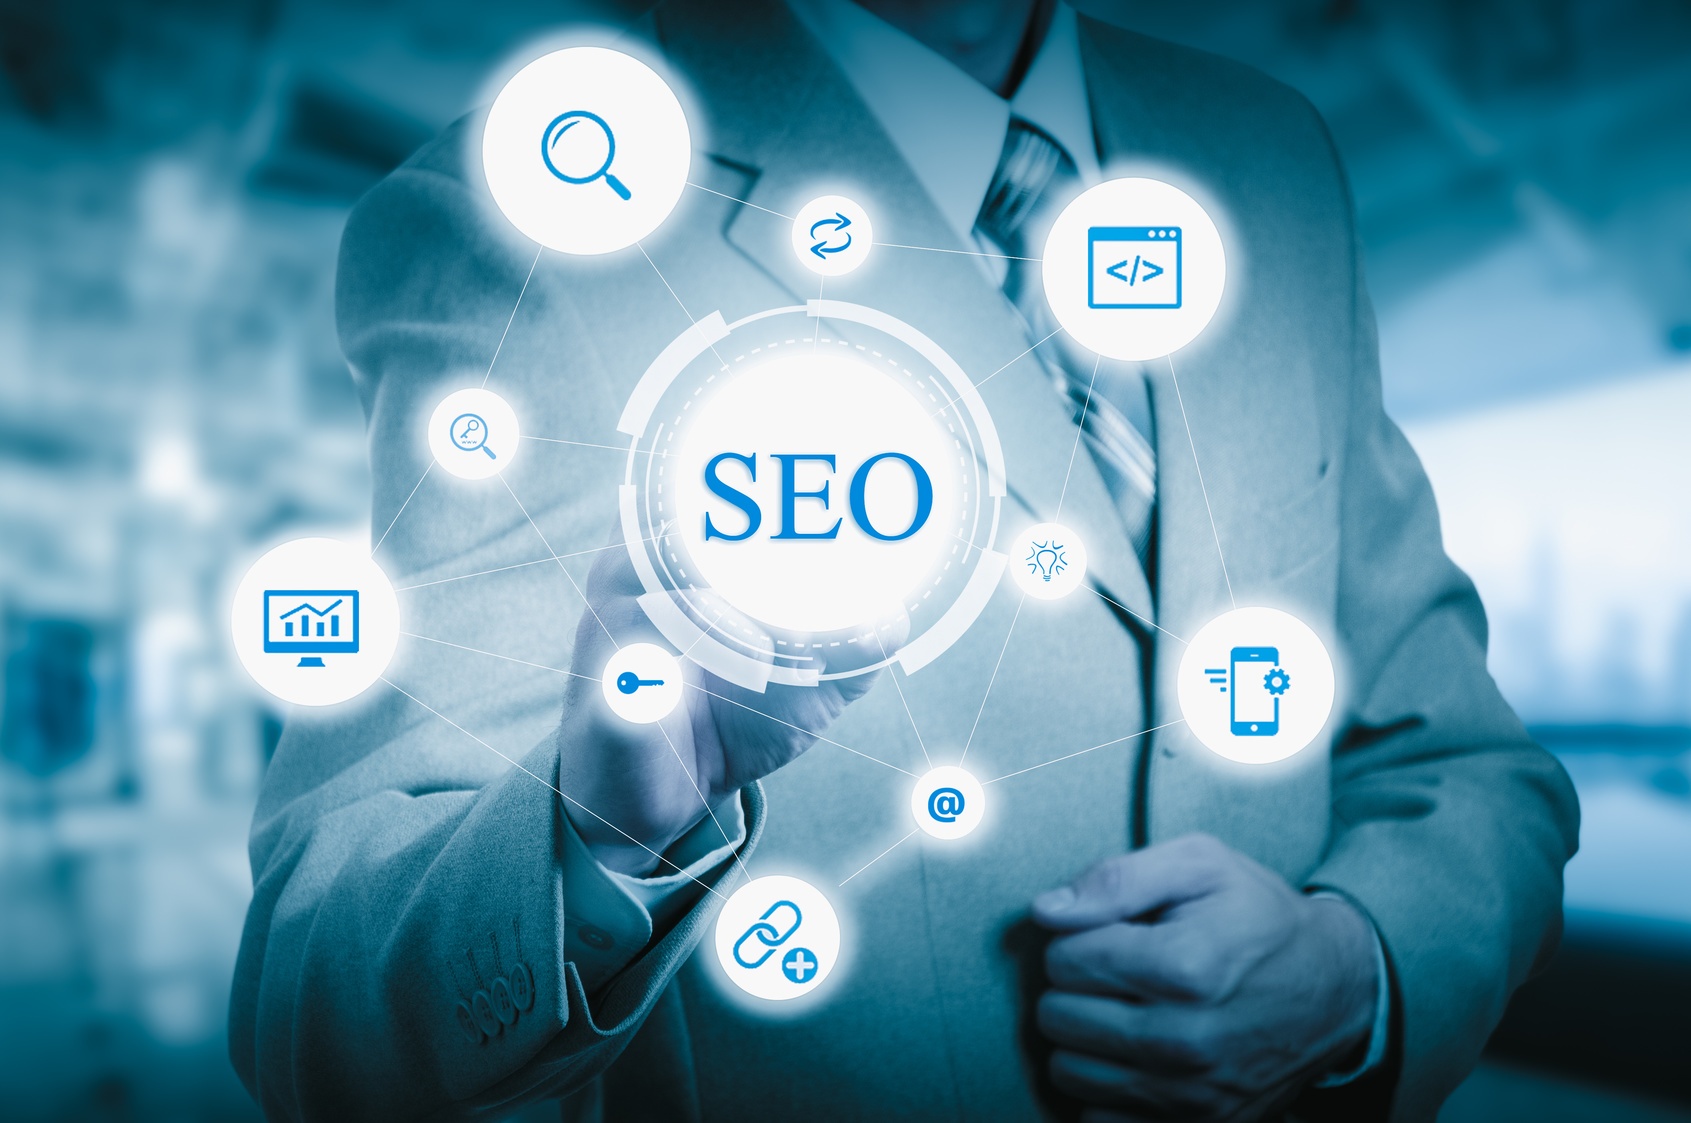 What Can You Expect From Your SEO Firm?